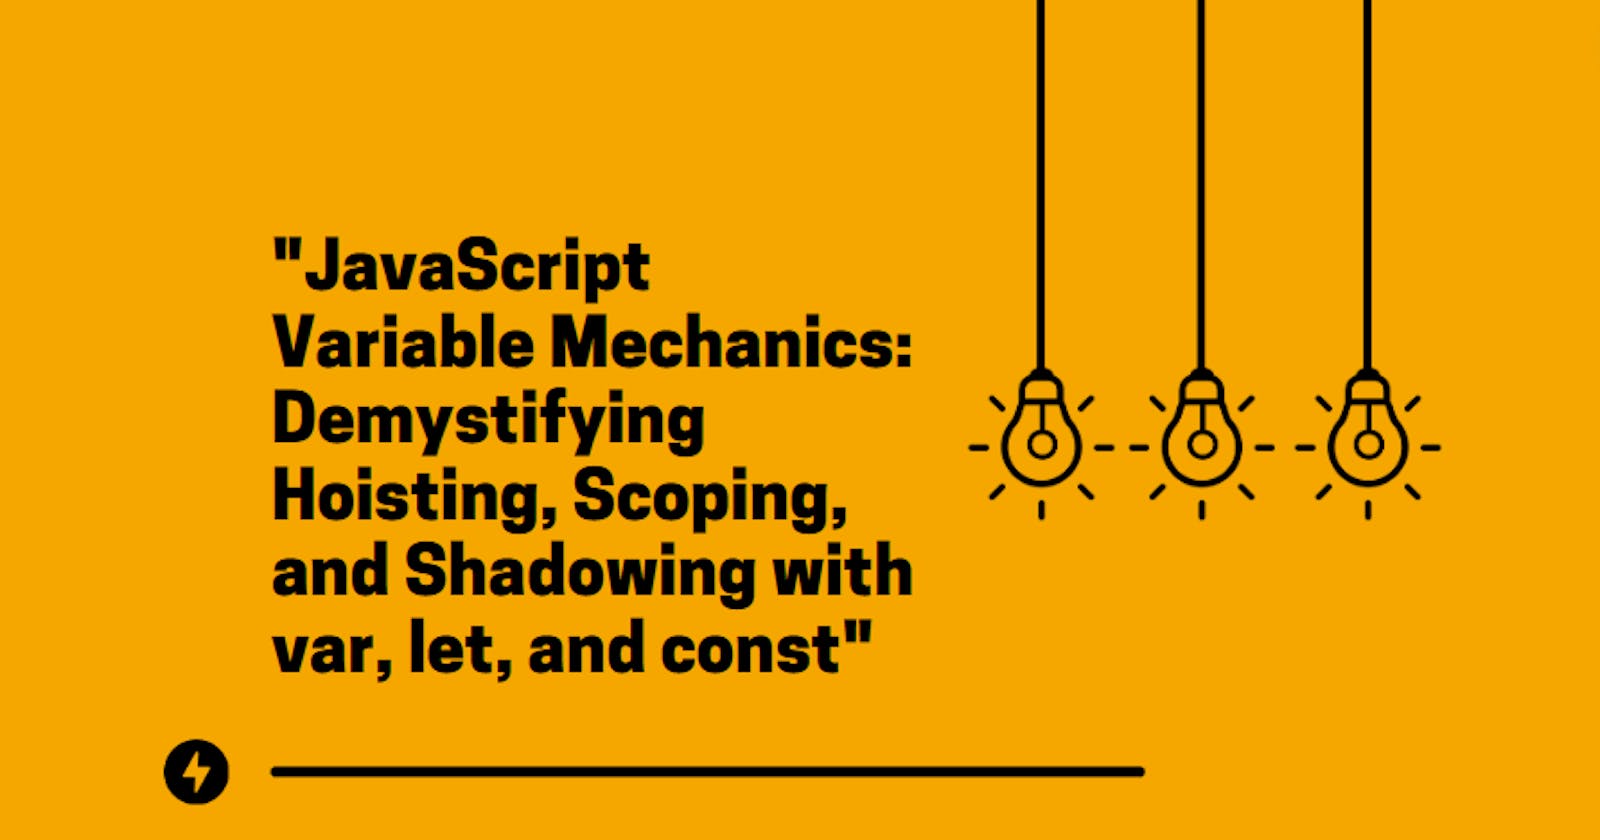 JavaScript Variables Under the Hood: How var, let, and const impact hoisting, scoping, and shadowing